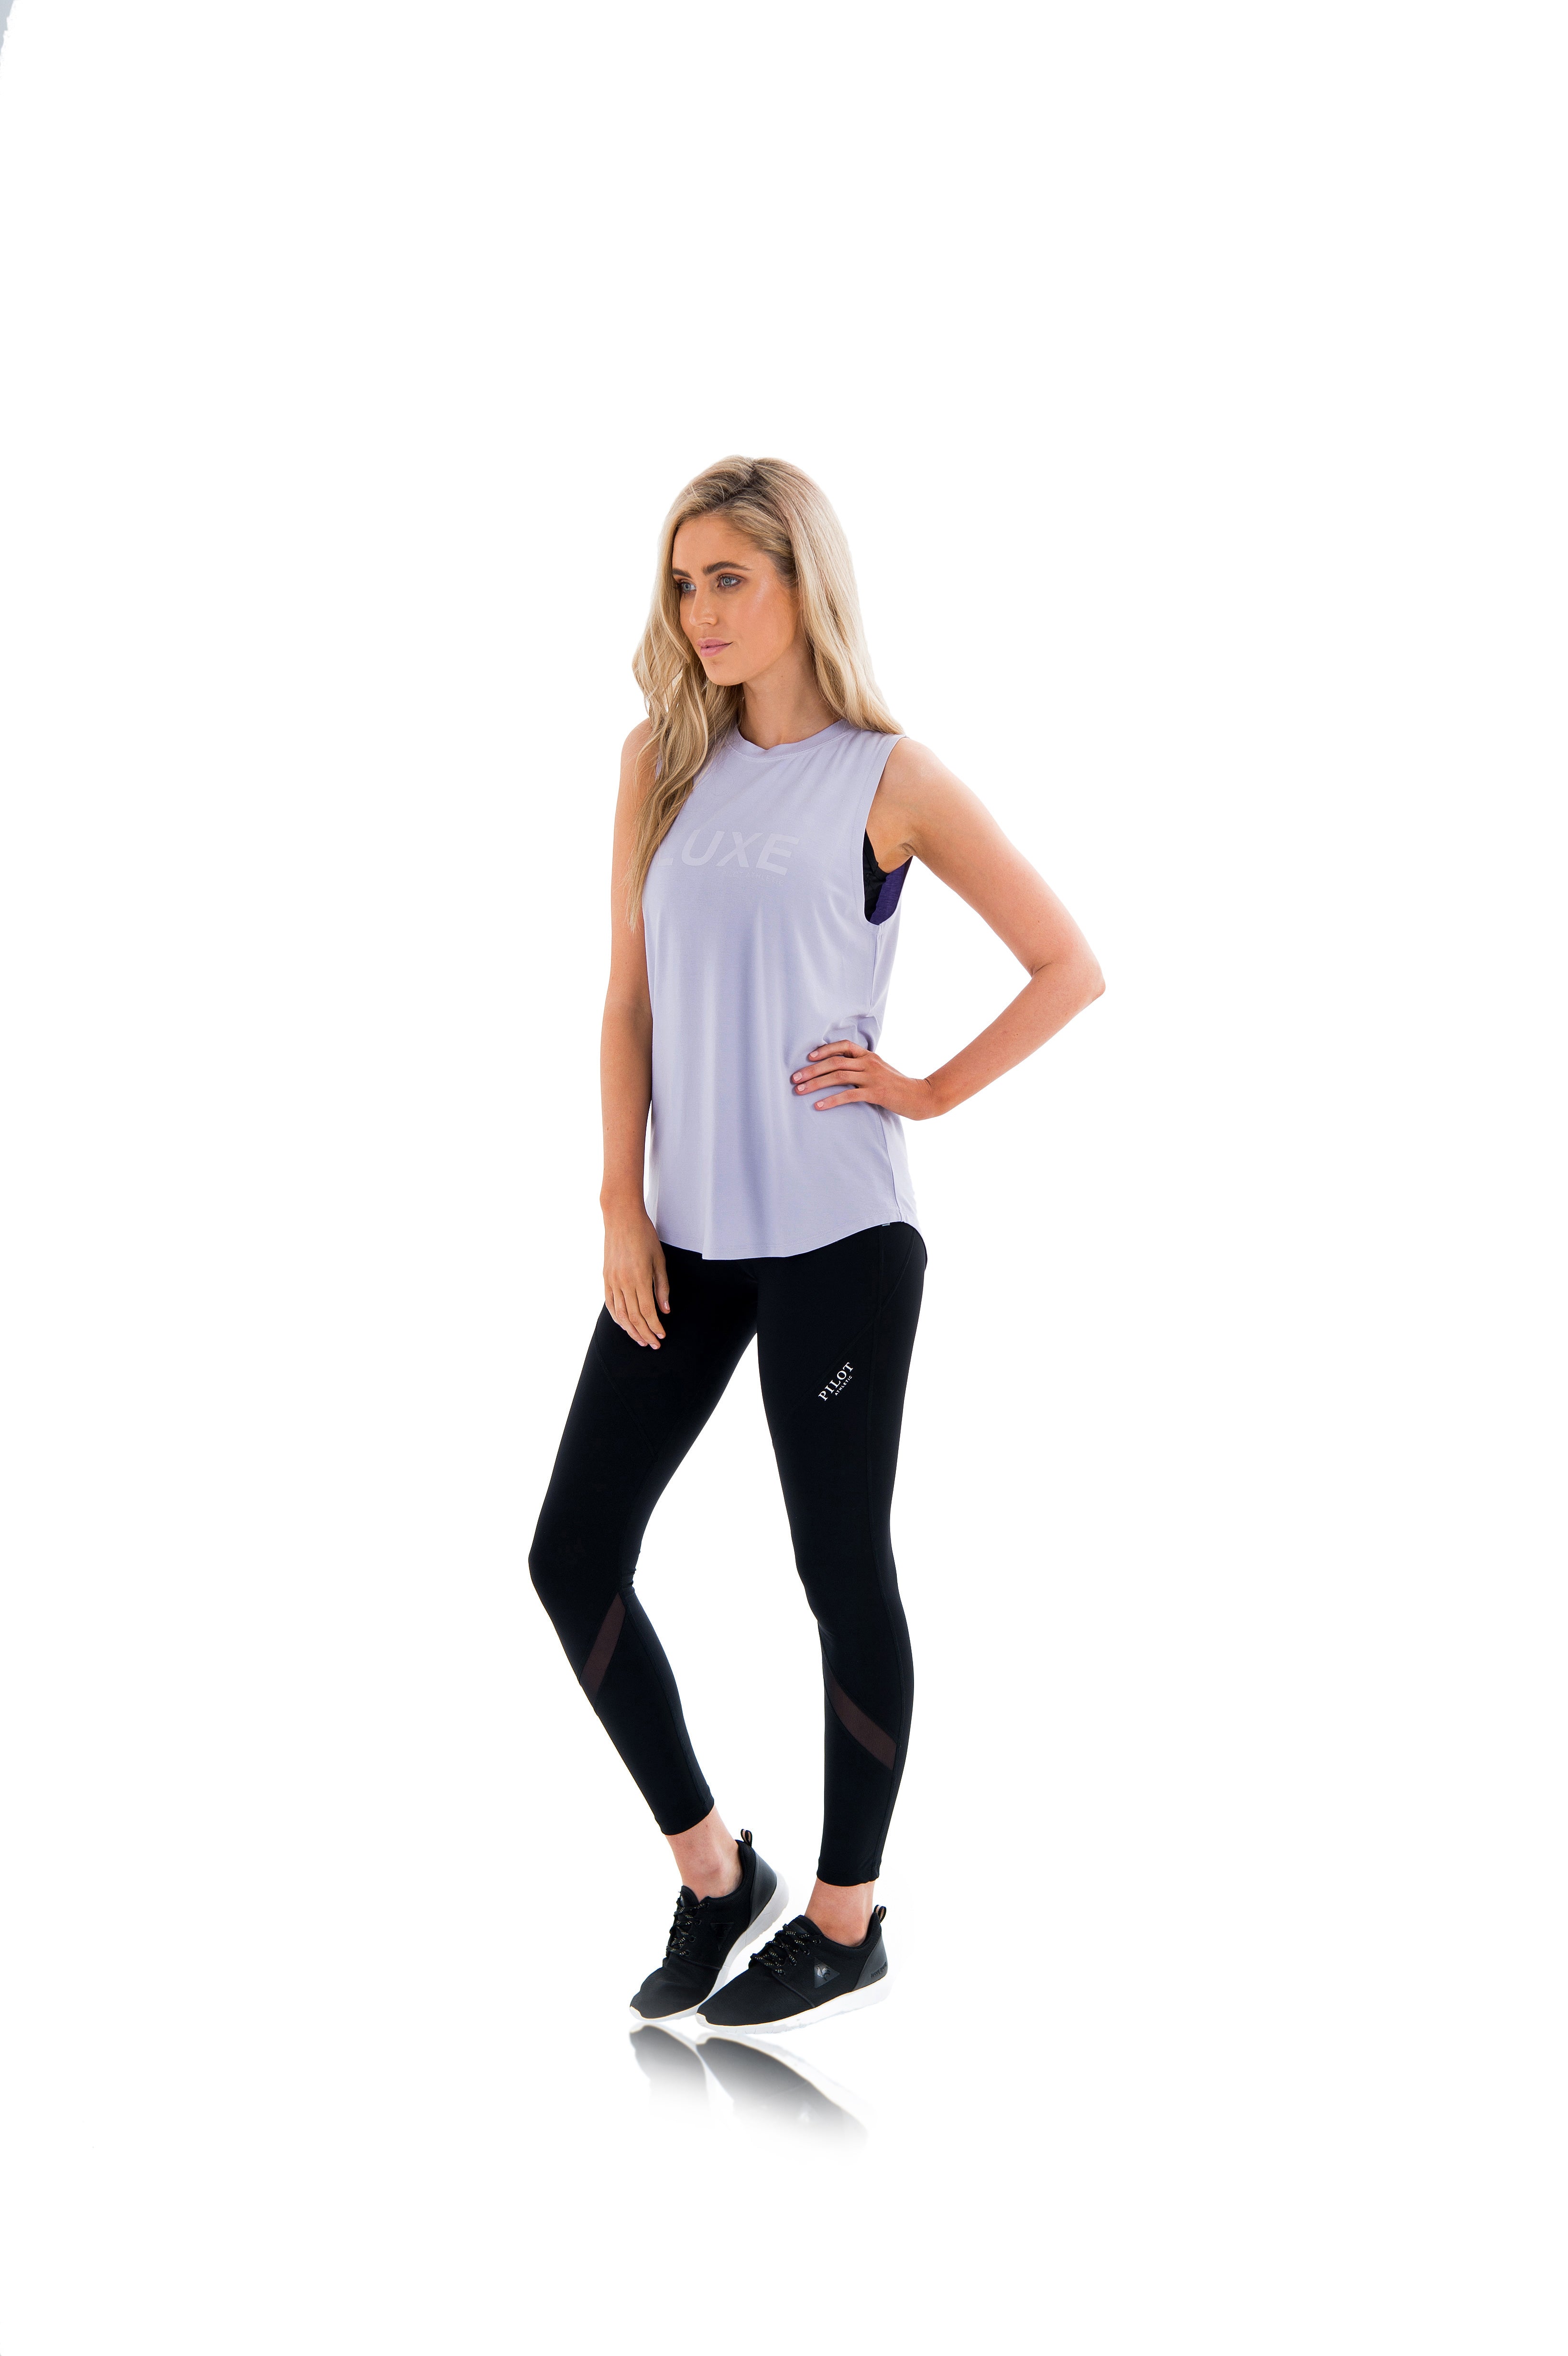 HARKNESS LUXE MUSCLE TEE - LAVENDER